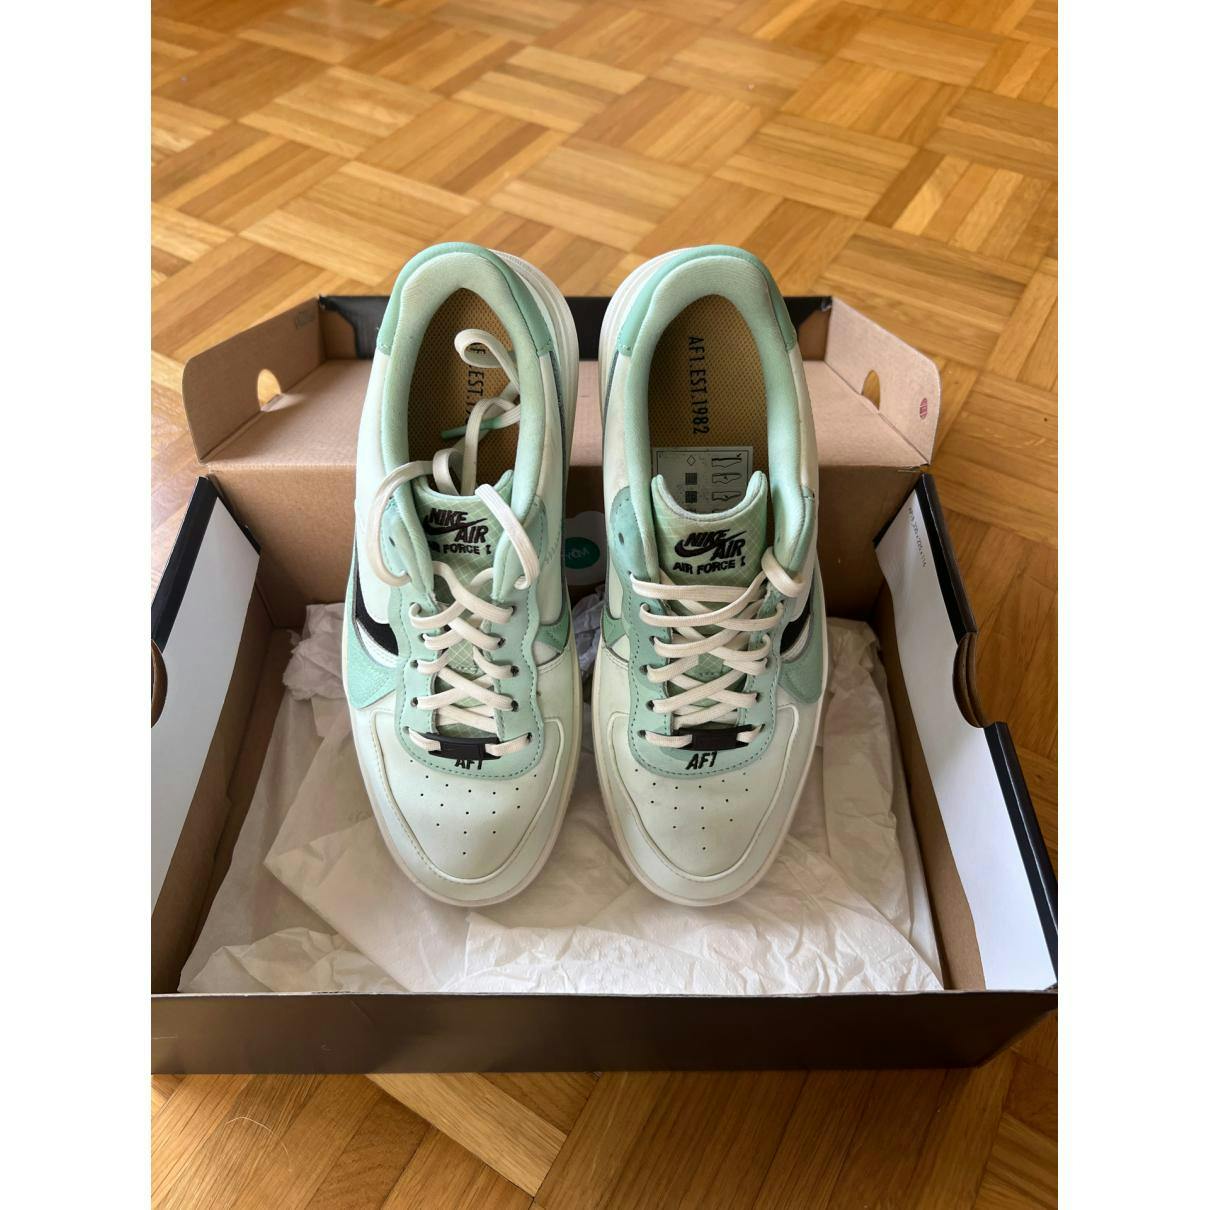 https://images.vestiairecollective.com/cdn-cgi/image/q=75,f=auto,/produit/green-leather-air-force-1-nike-trainers-34609810-9_3.jpg?secret=VC-e9eee96a-a819-4431-ad12-d066be2626ef